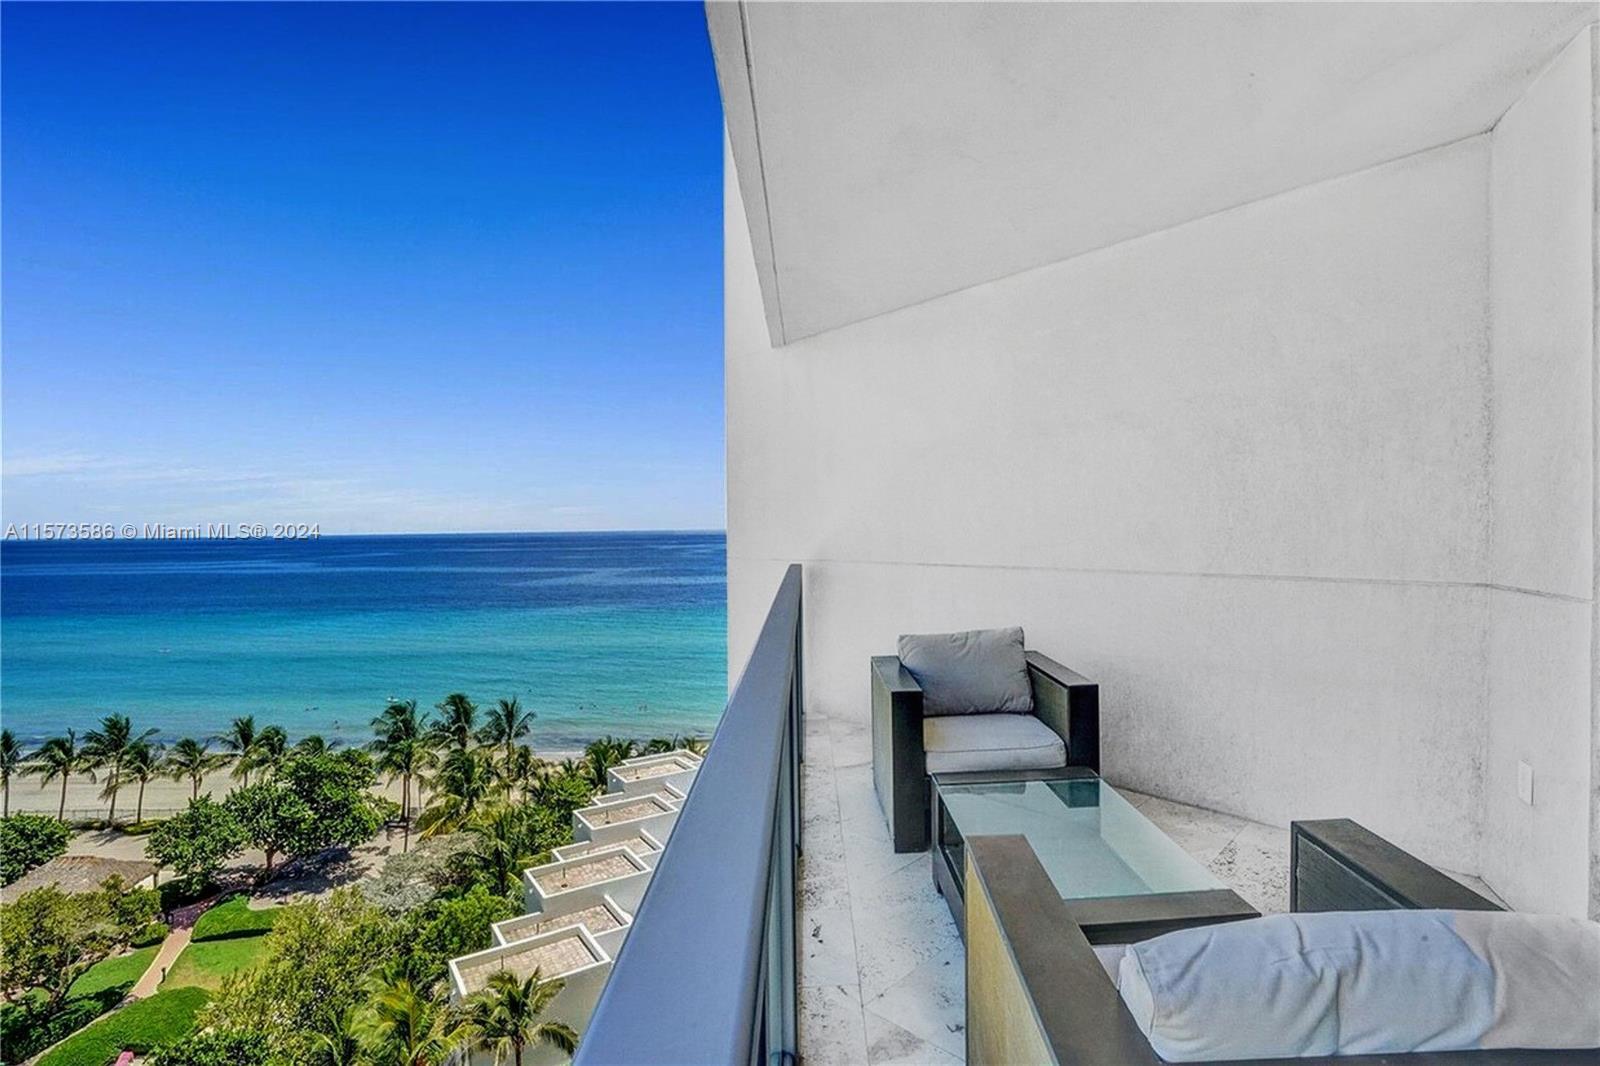 WELCOME TO LUXURY OCEAN LIVING AT ITS FINEST! Located in Hollywood Beach, Ocean Palms Condominium is